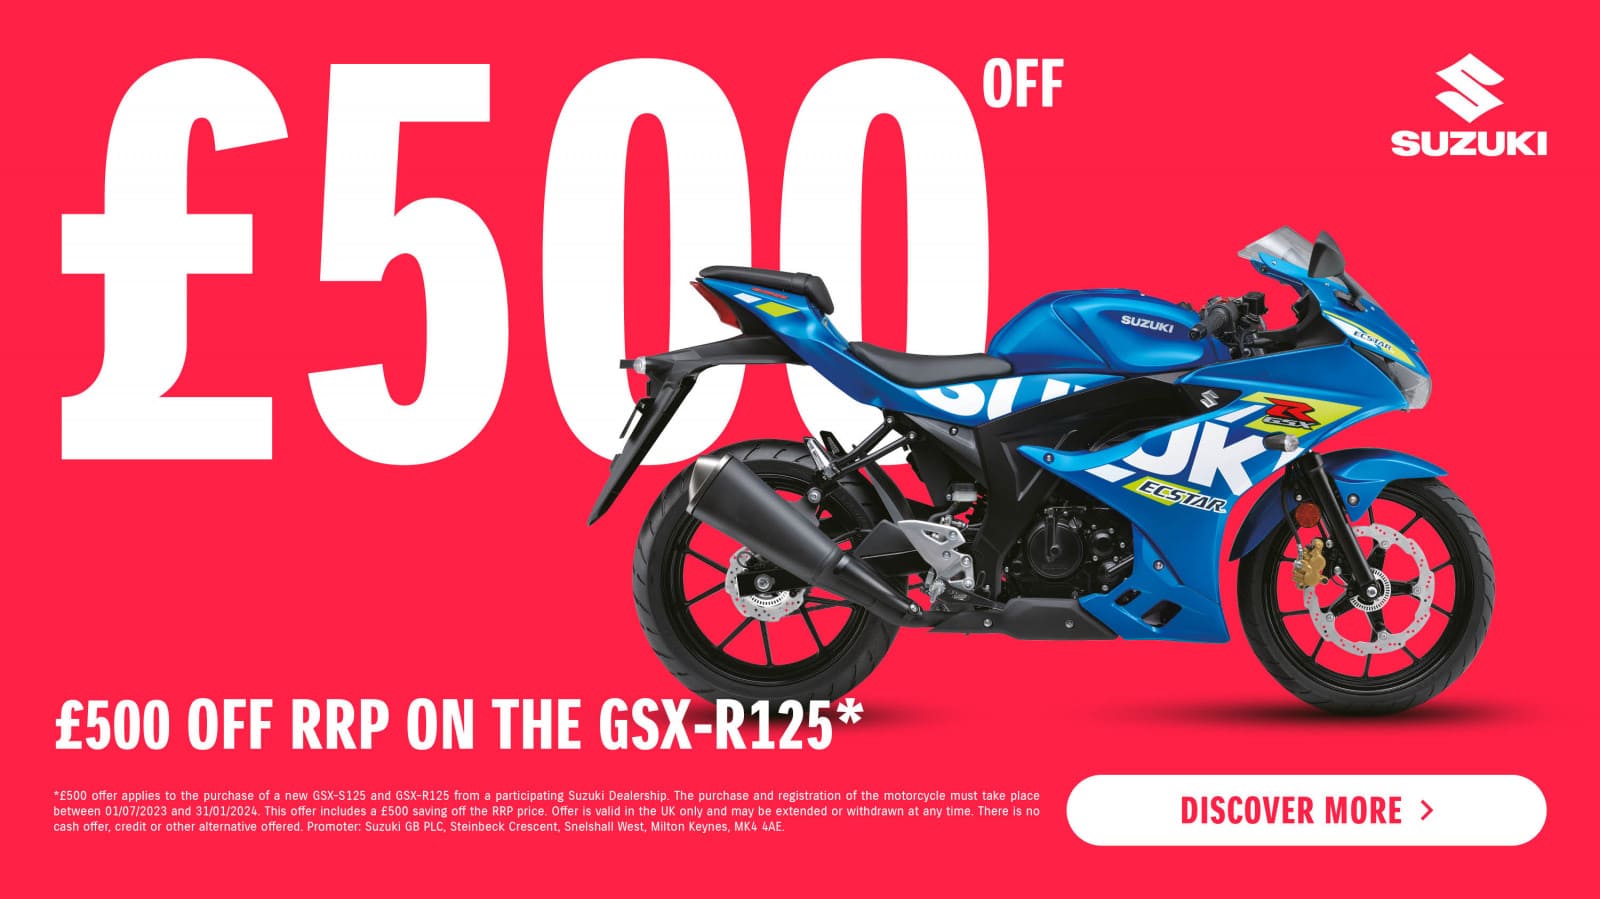 Save £500 on a brand new Suzuki GSX-R125! Click here to find out more!